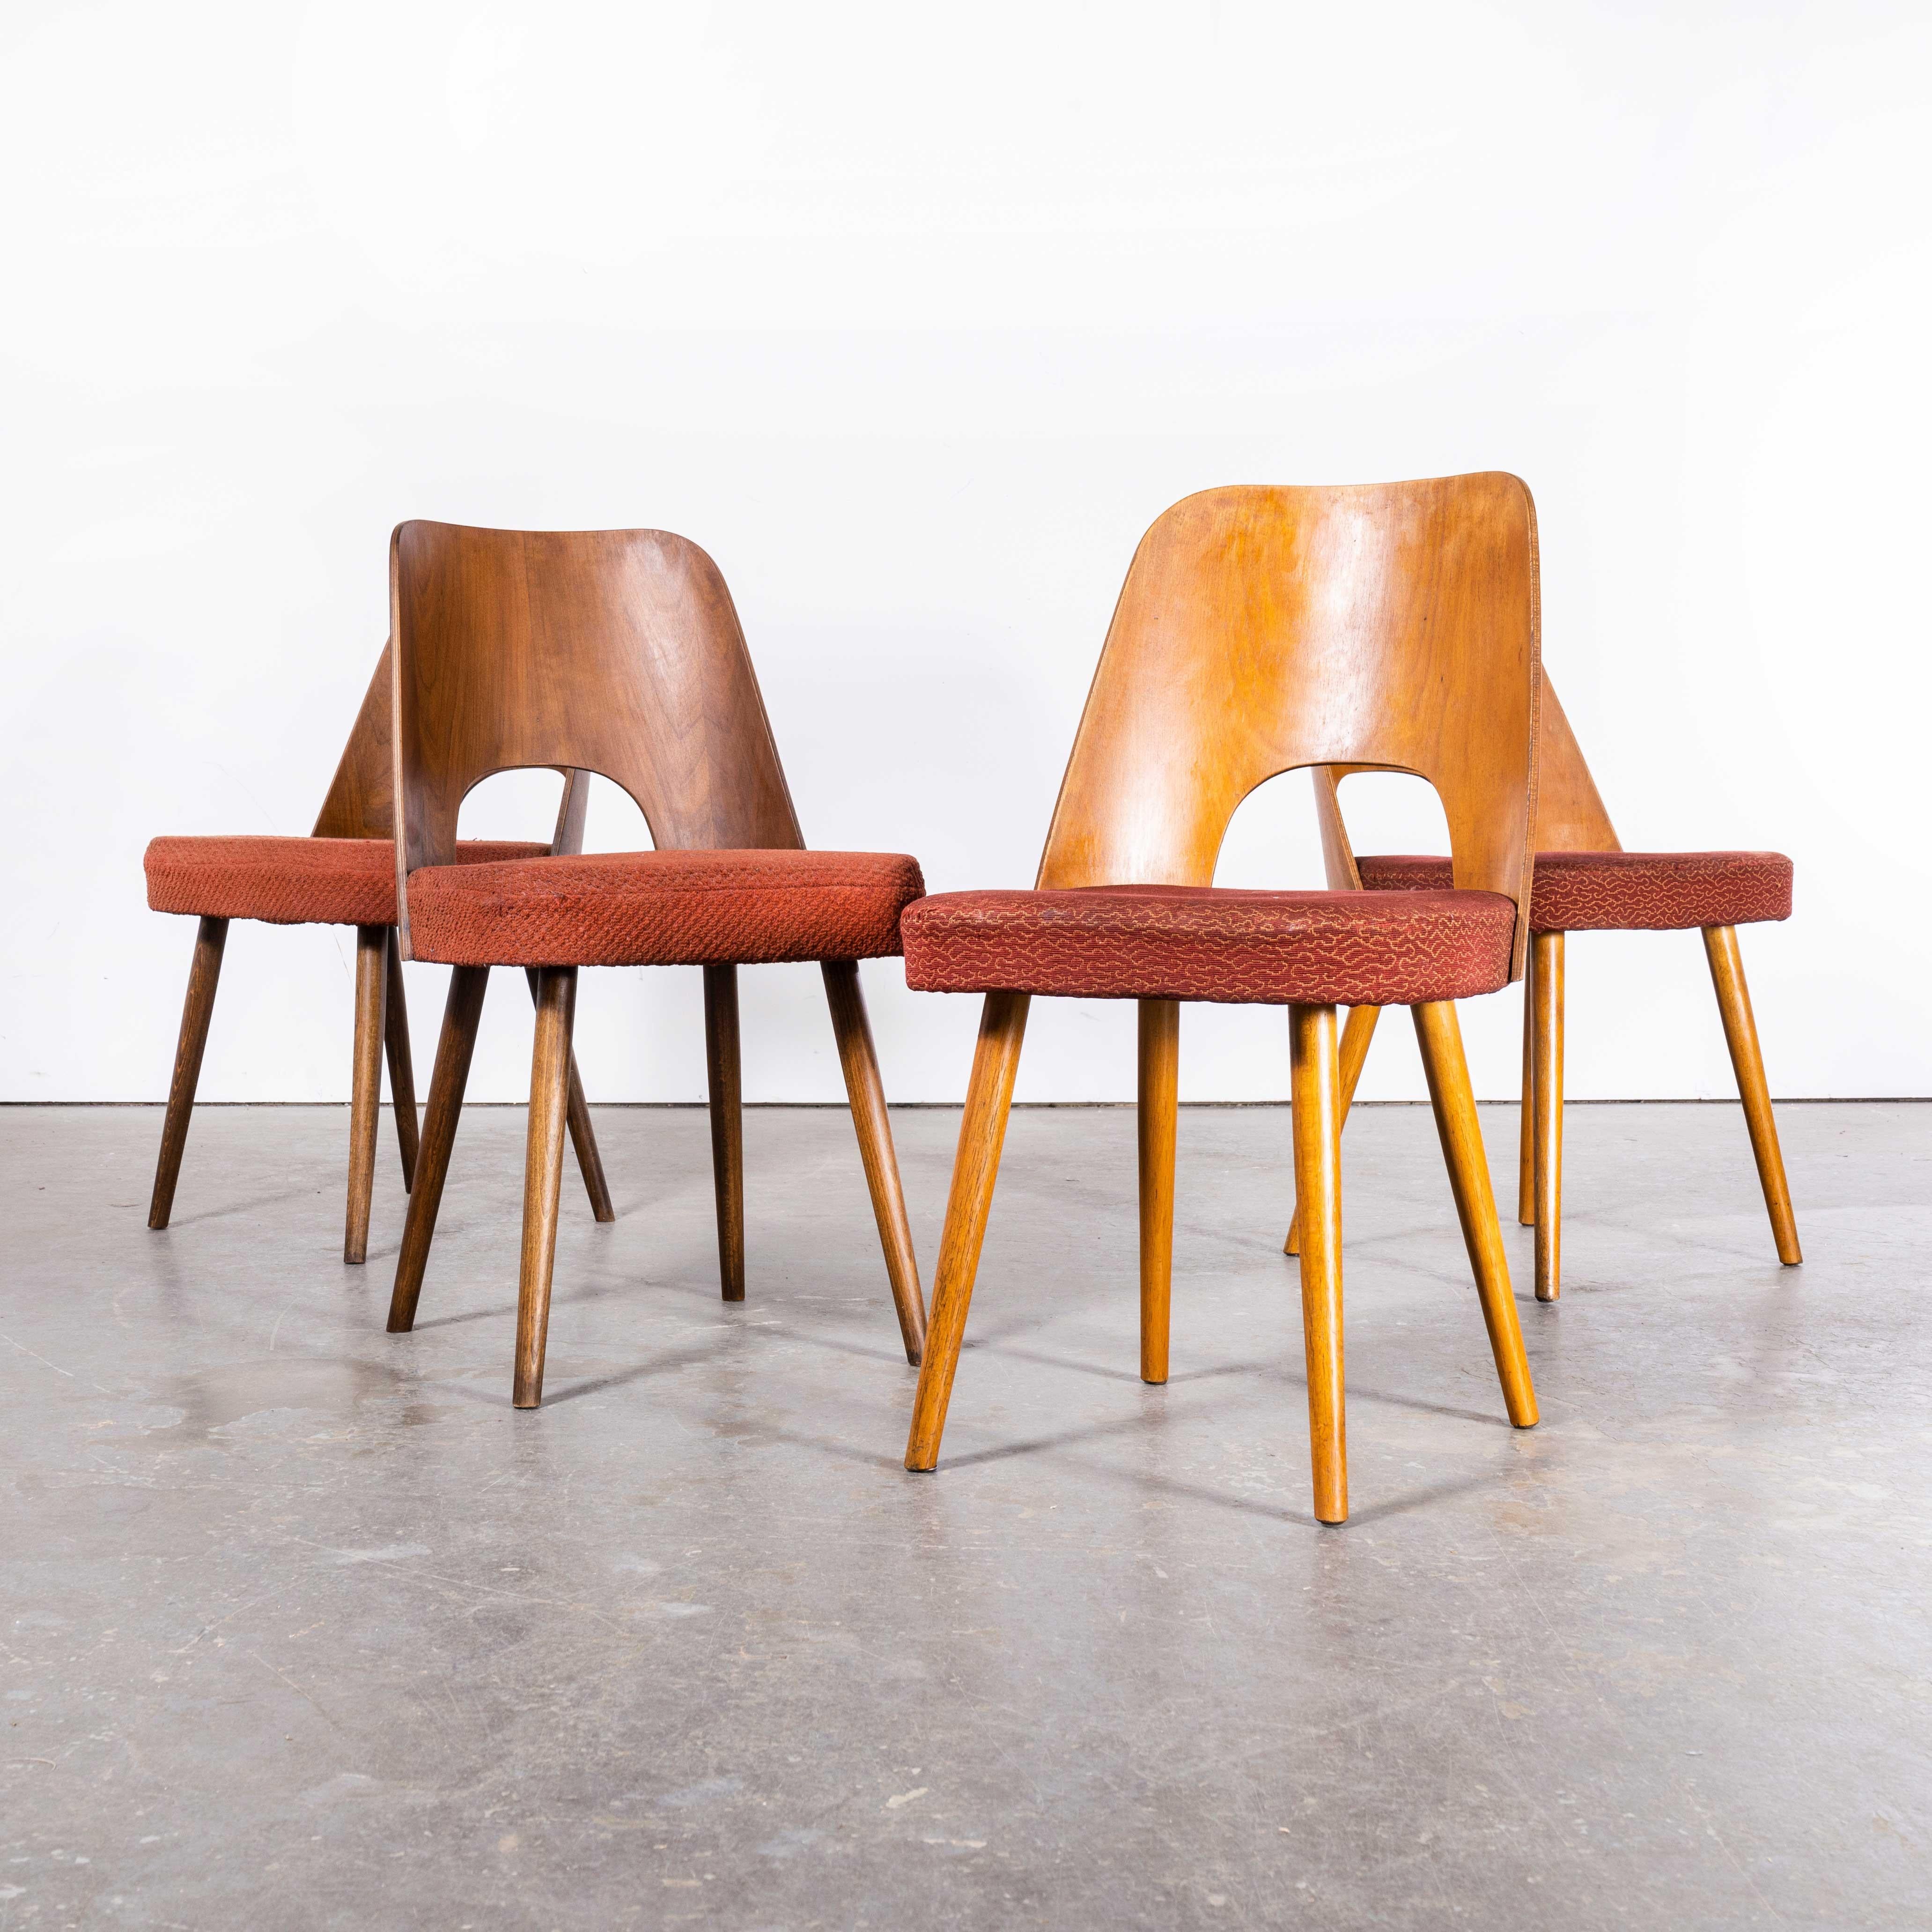 1960s Set Of Four Upholstered Dining Chairs – Oswald Haerdtl (2349)
1960s Set Of Four Upholstered Dining Chairs – Oswald Haerdtl. These chairs were produced by the famous Czech firm Ton, still trading today and producing beautiful furniture, they